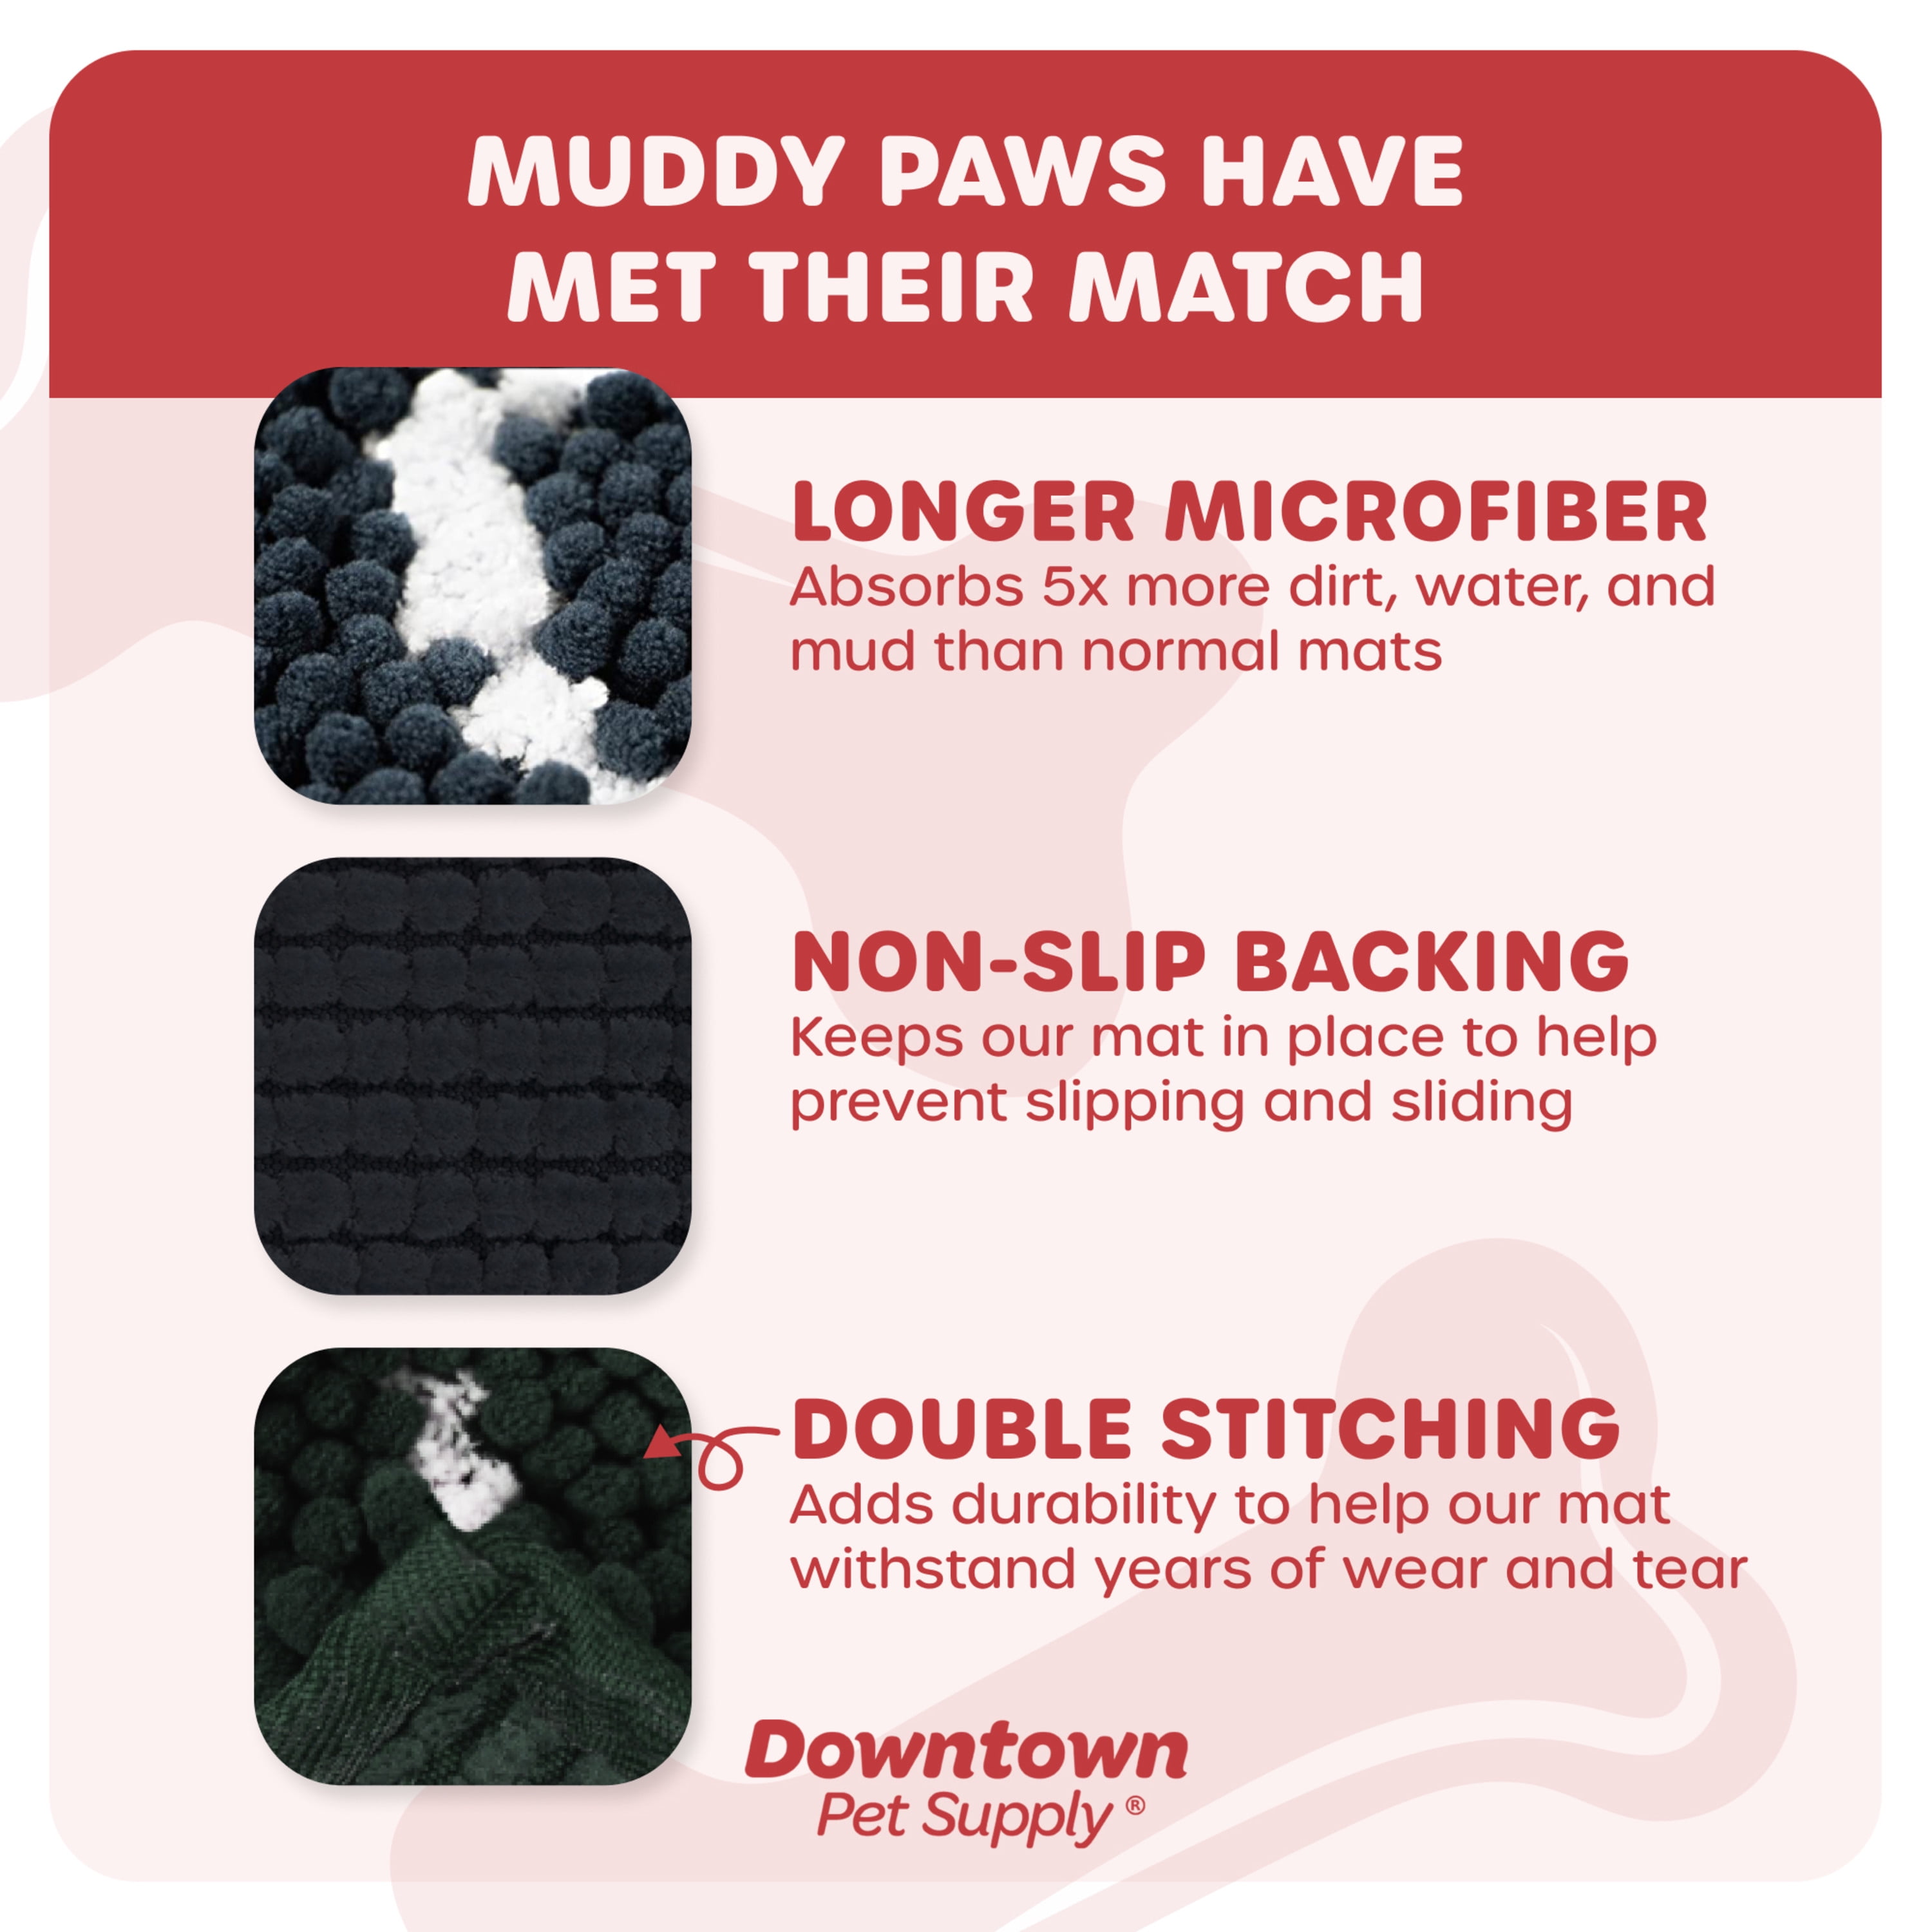 My Doggy Place Microfiber Dog Mat for Muddy Paws, 8 x 2 charcoal with Paw  Print - Non-Slip, Absorbent and Quick-Drying Dog Paw c